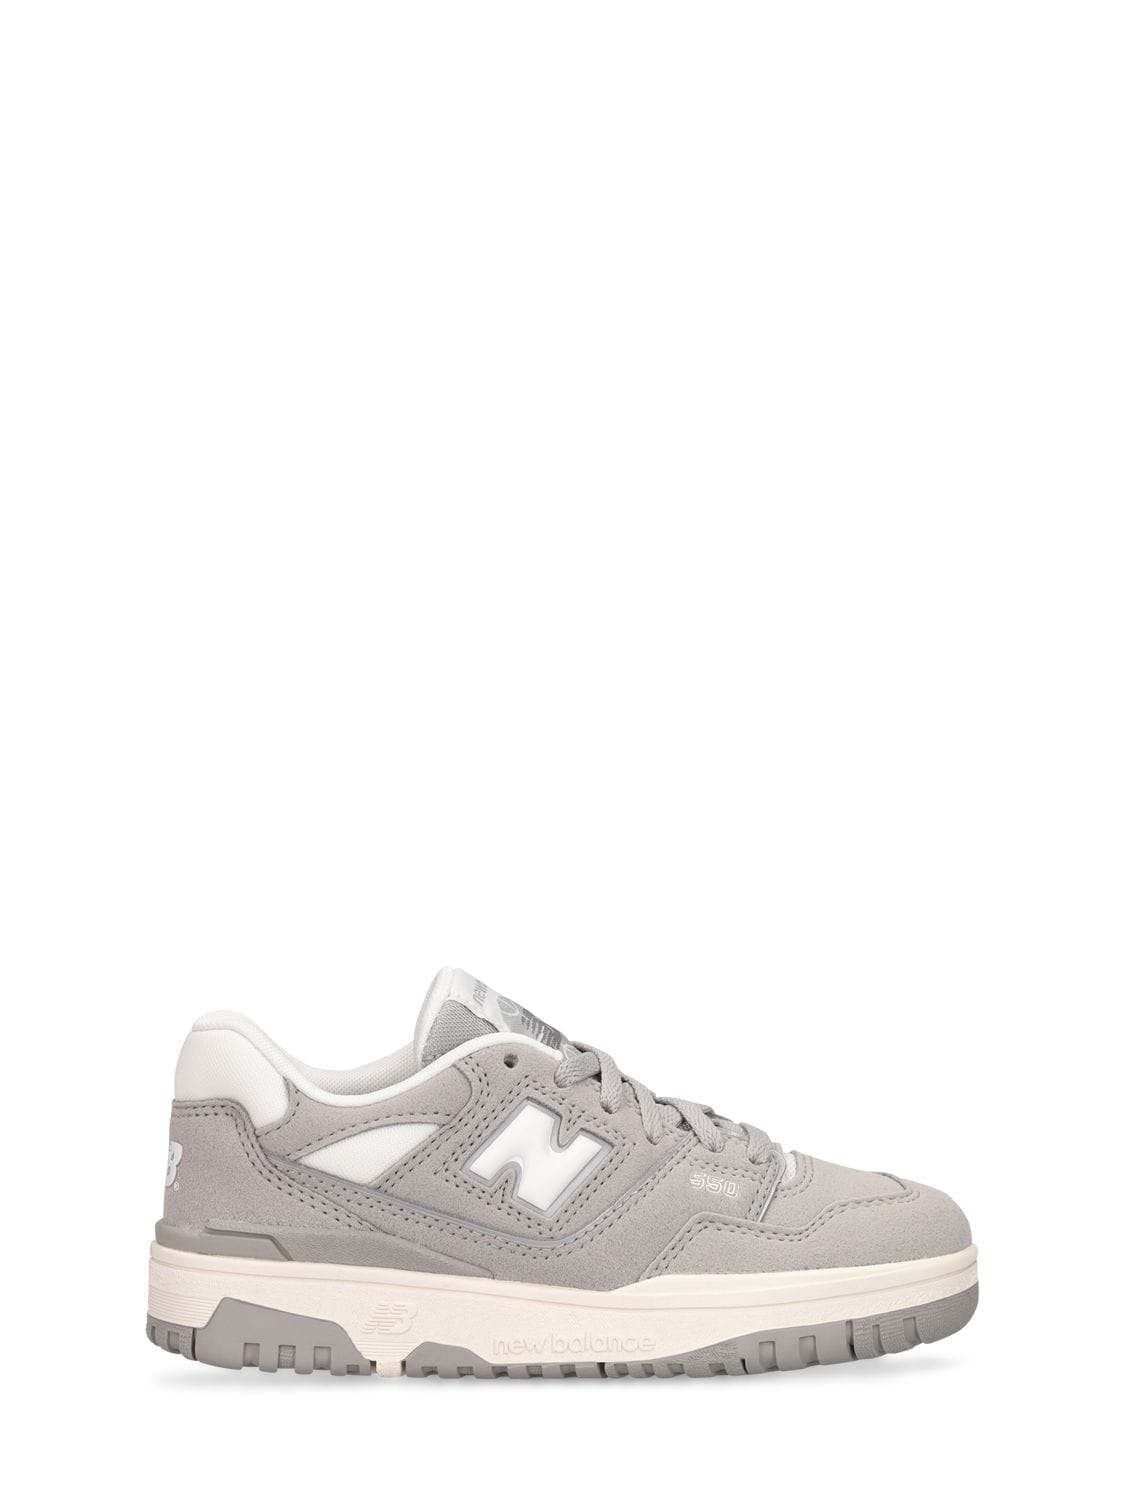 NEW BALANCE 550 LEATHER LACE-UP trainers